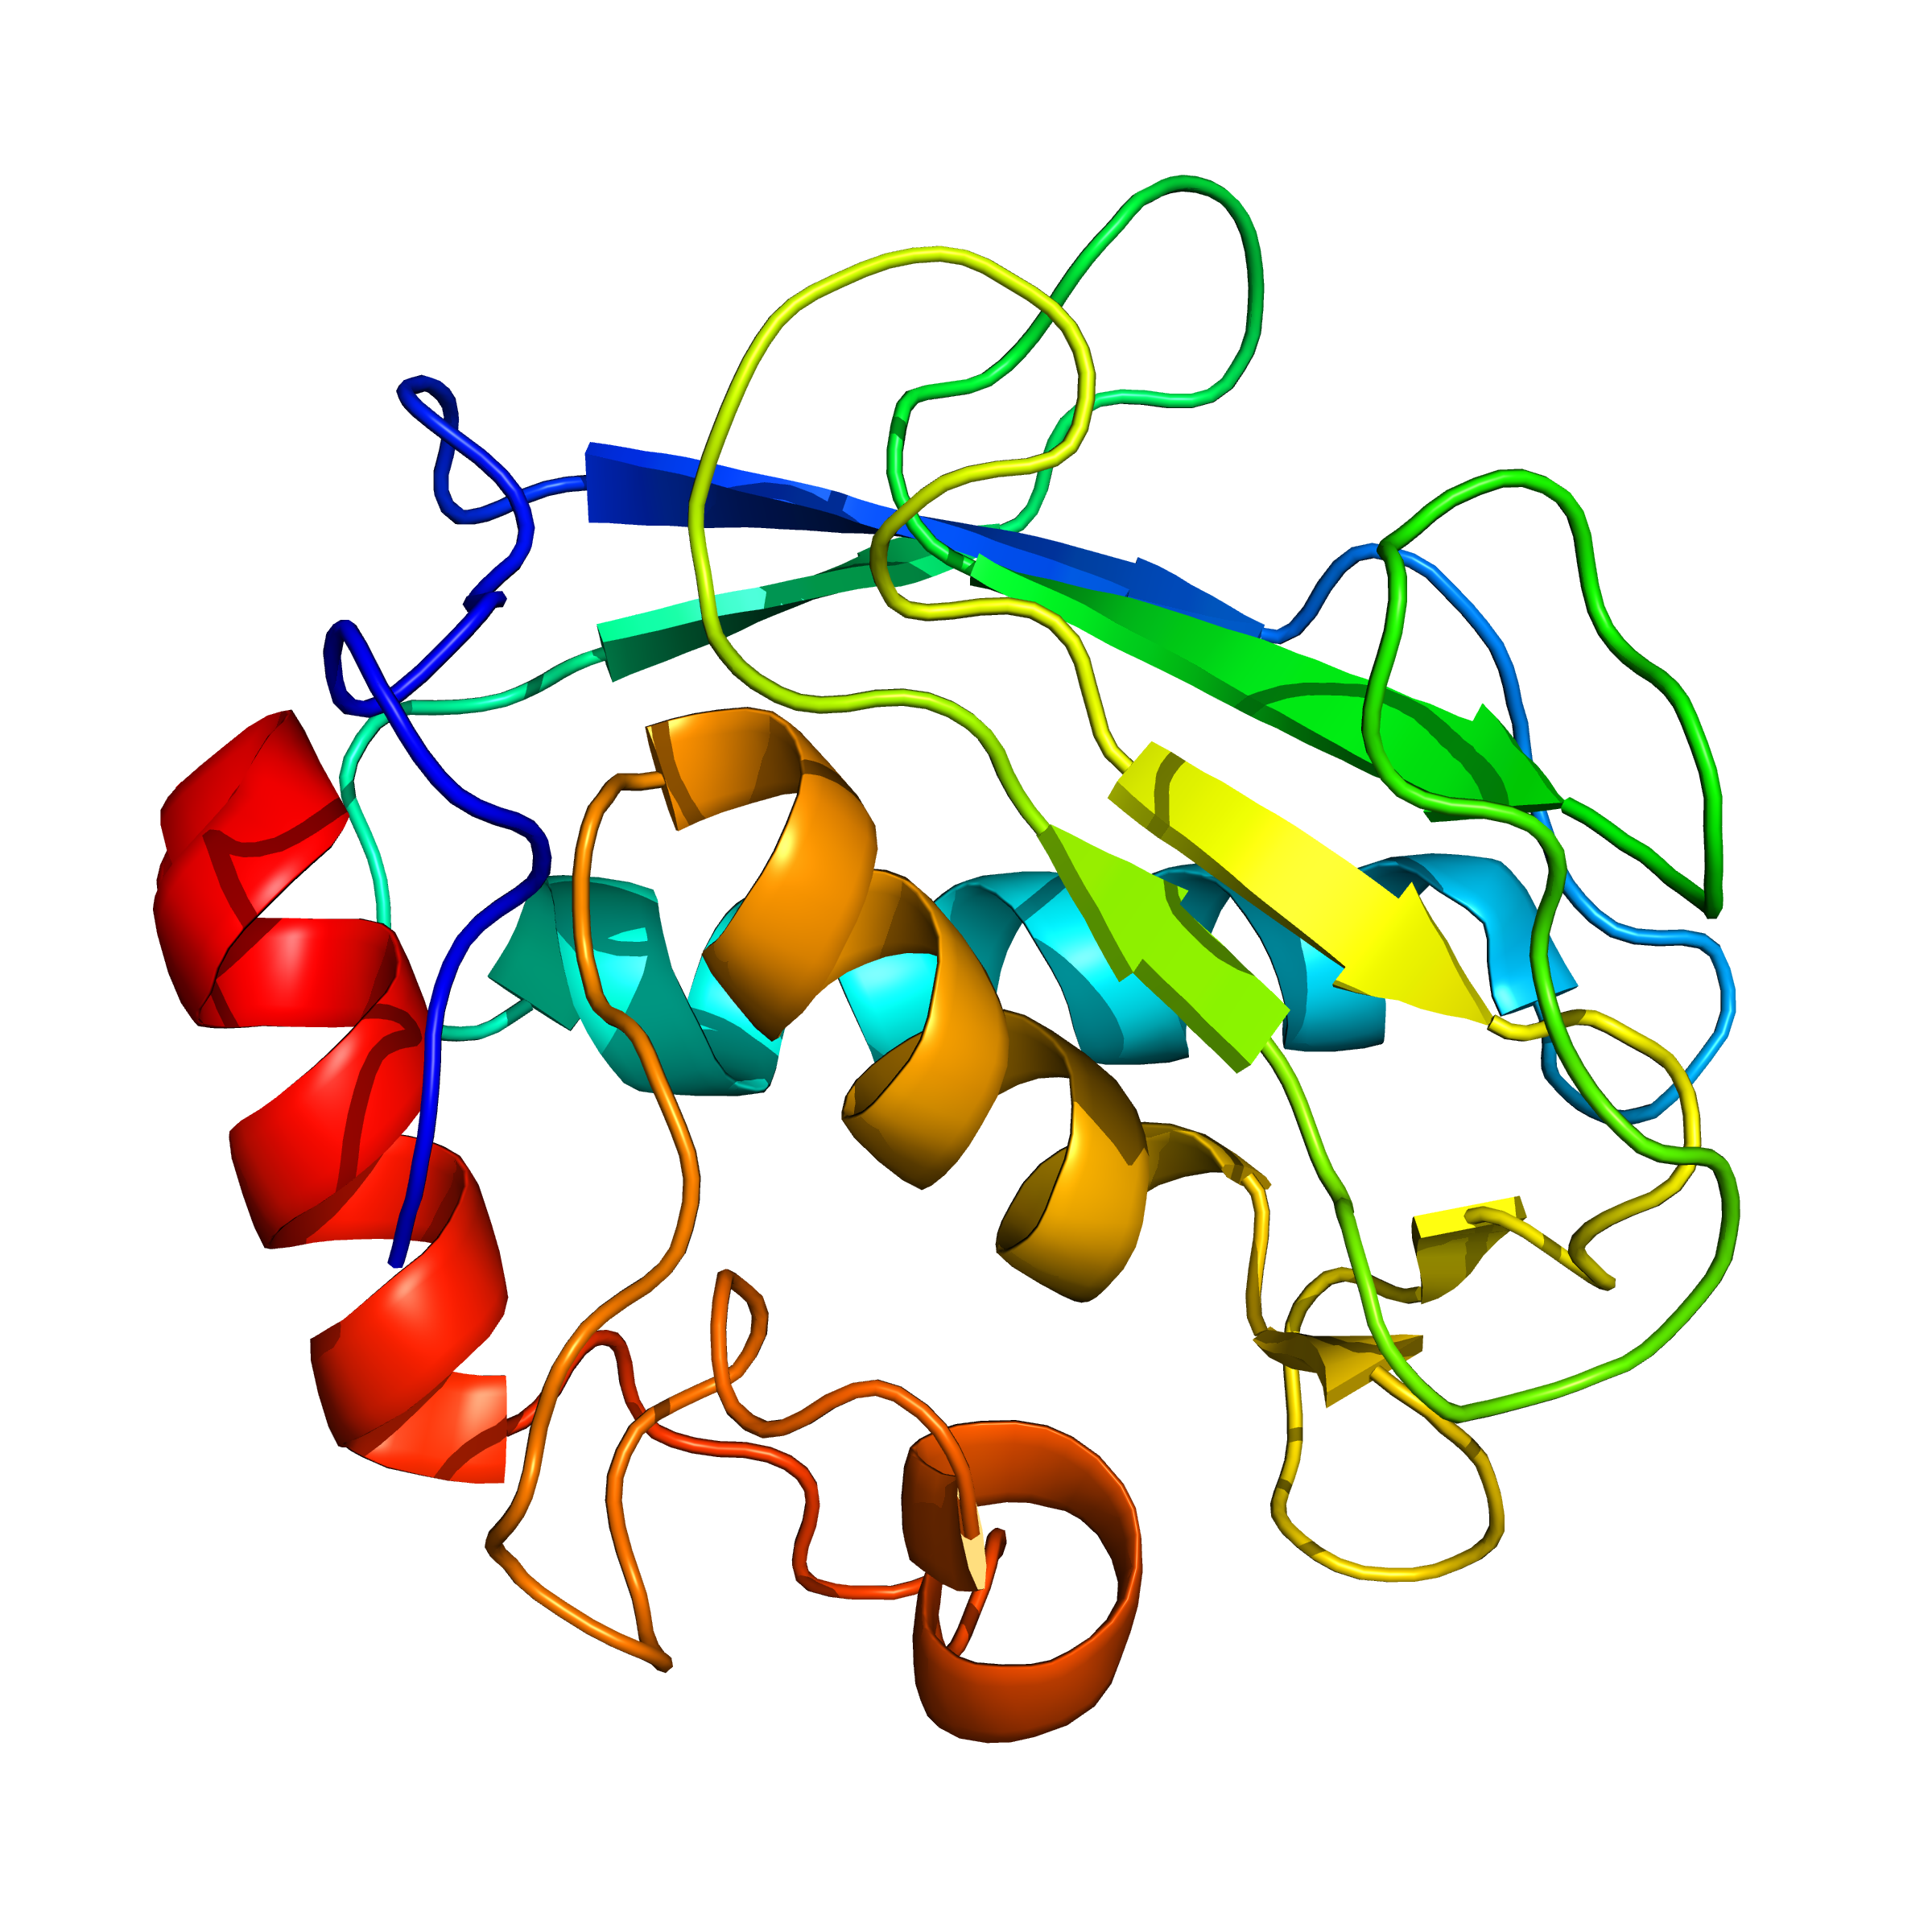 mmp3 | recombinant proteins offer